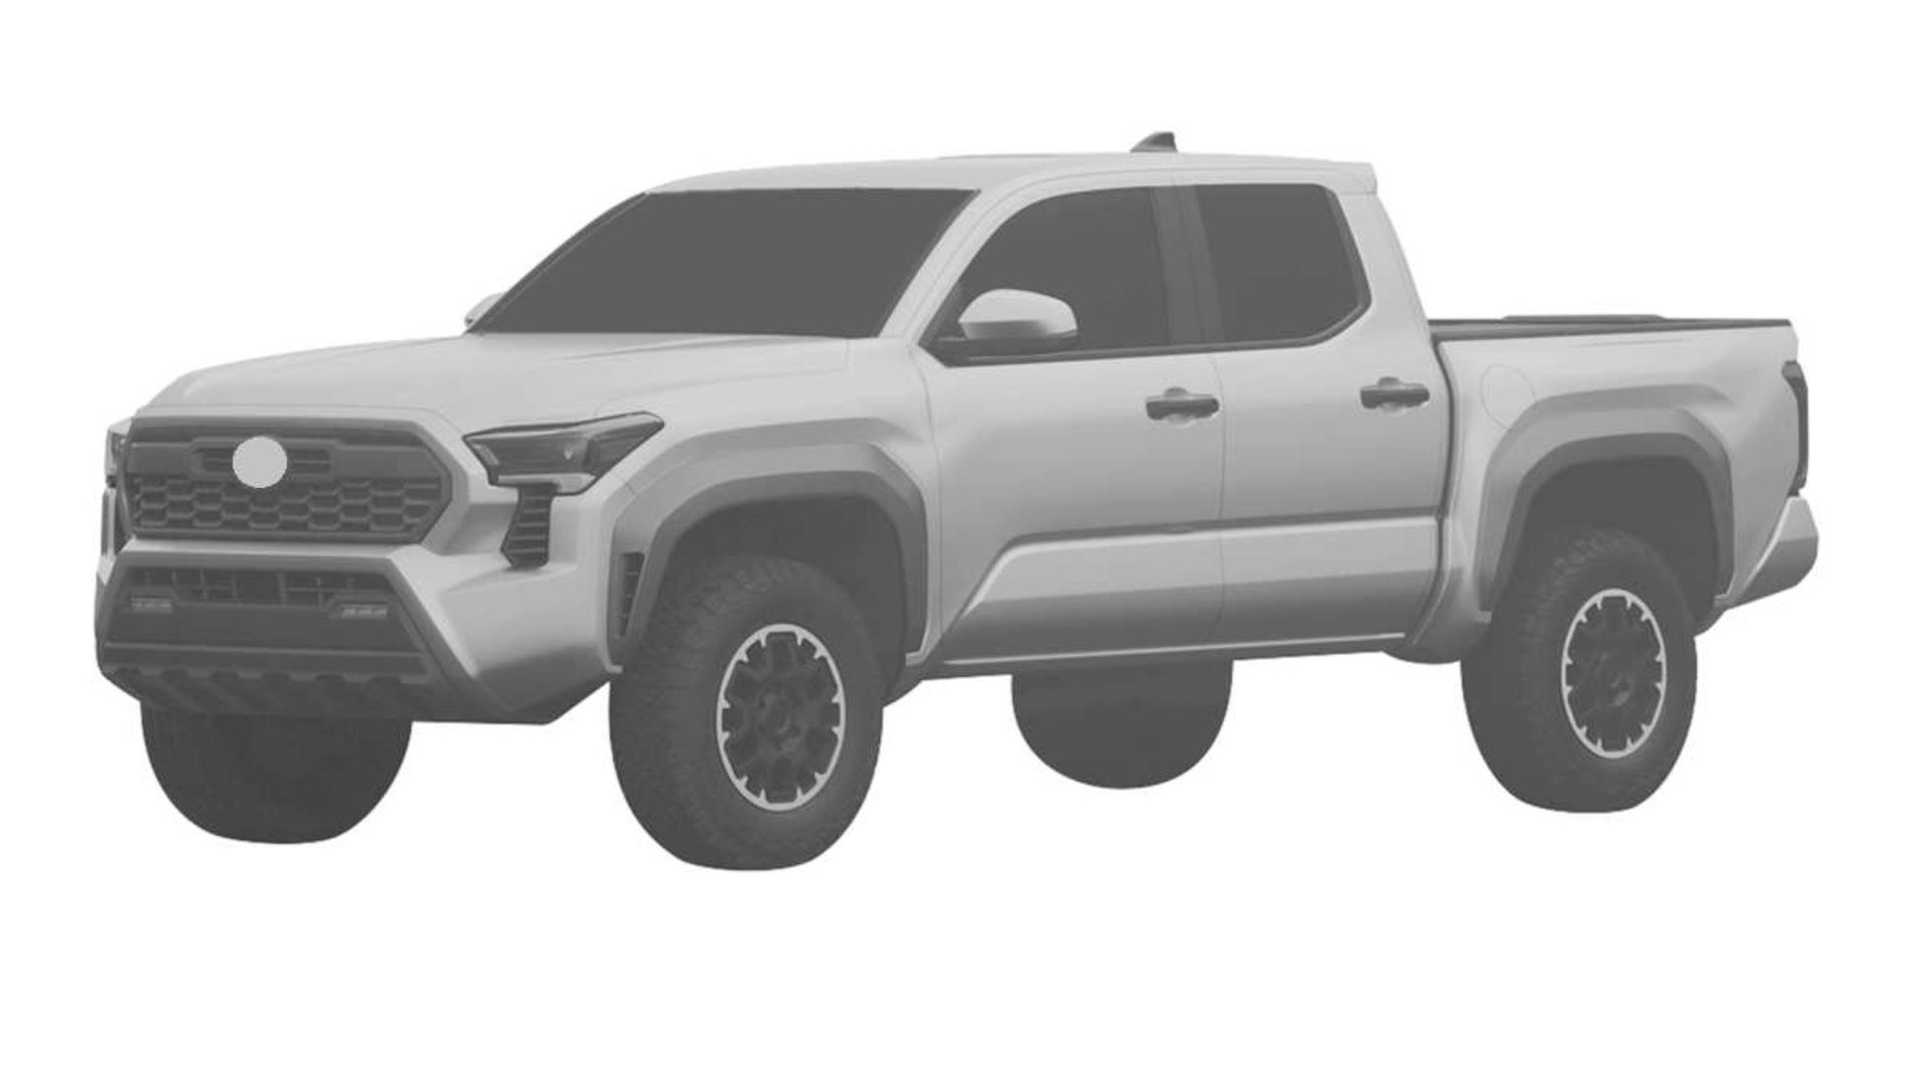 2024 Tacoma 2024 Tacoma Design Images Revealed in Patent! 📸 🕵🏻‍♂️ 2024 Toyota Tacoma 4th gen patent design 3